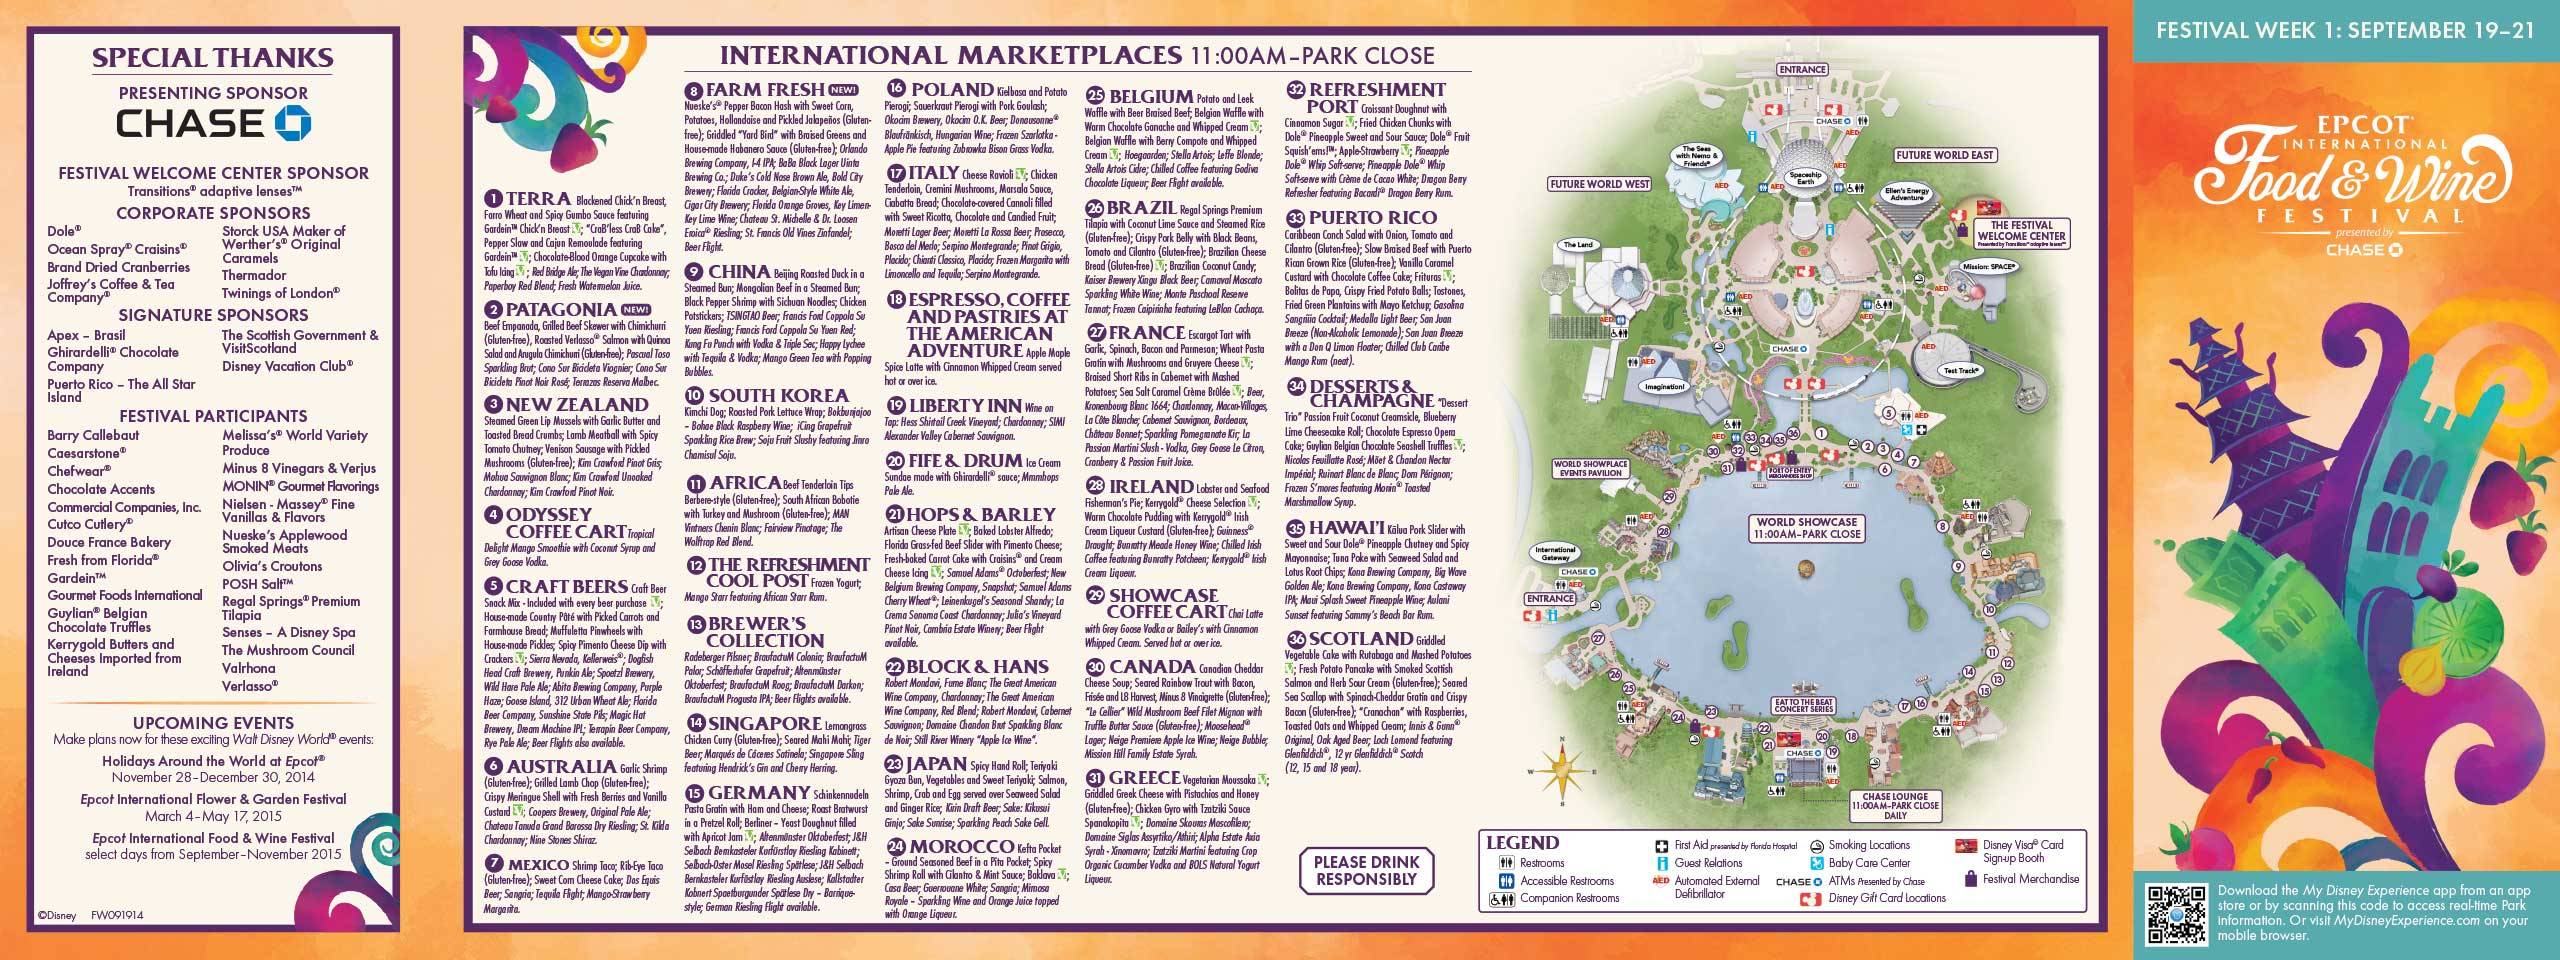 2014 Epcot International Food and Wine Festival 2014 Guide Map - Week 1